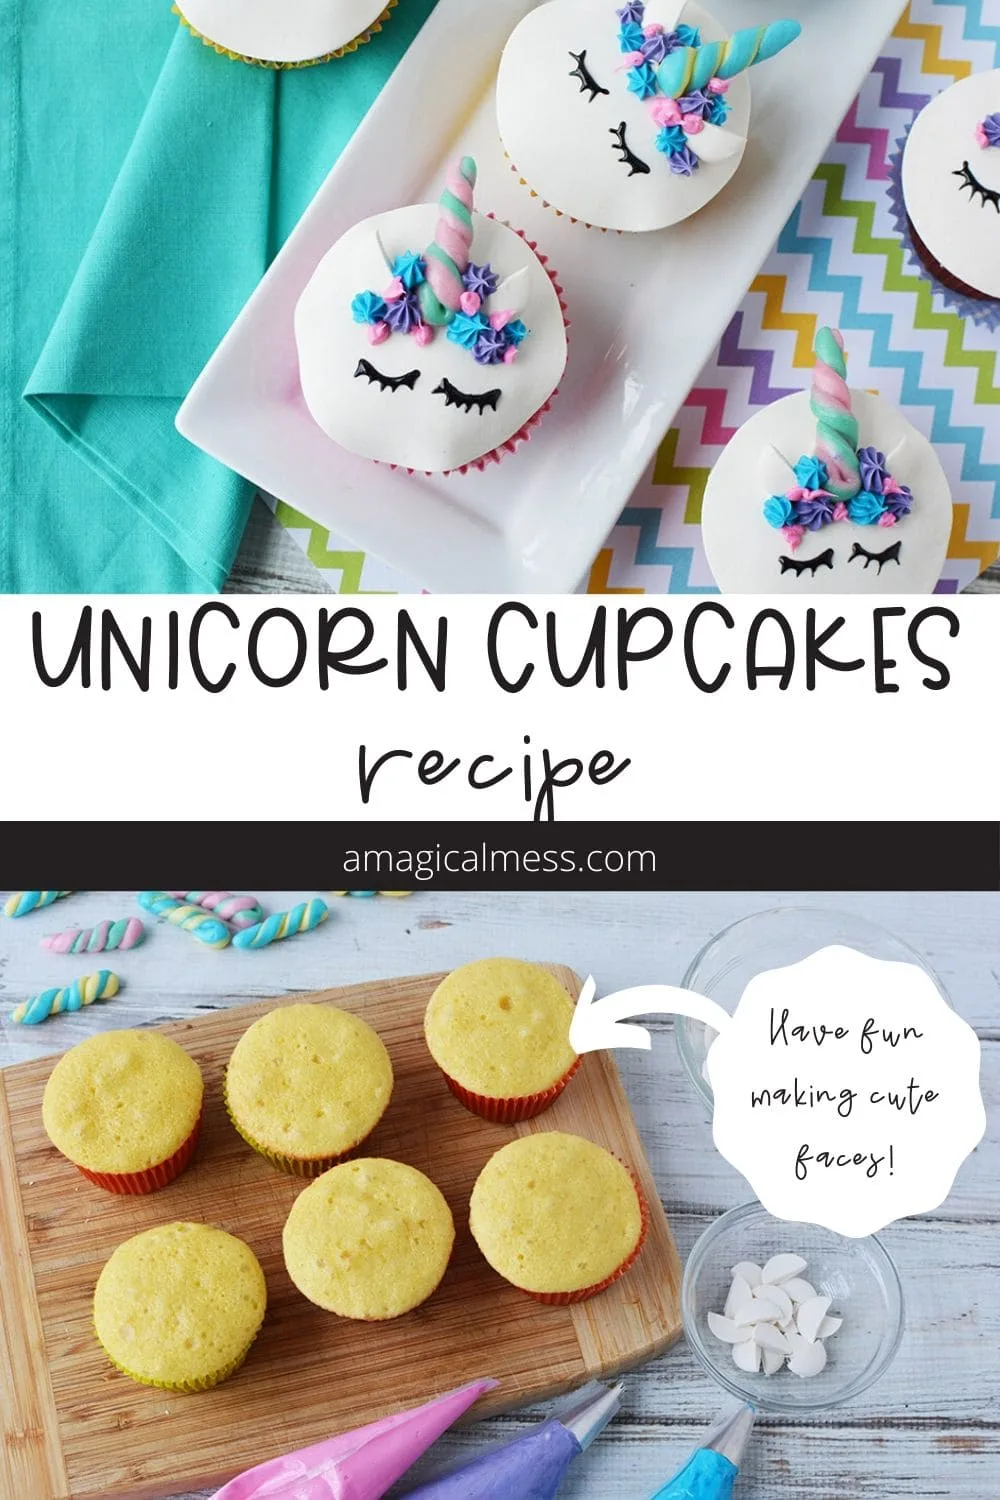 Plain cupcakes and decorated unicorn faces